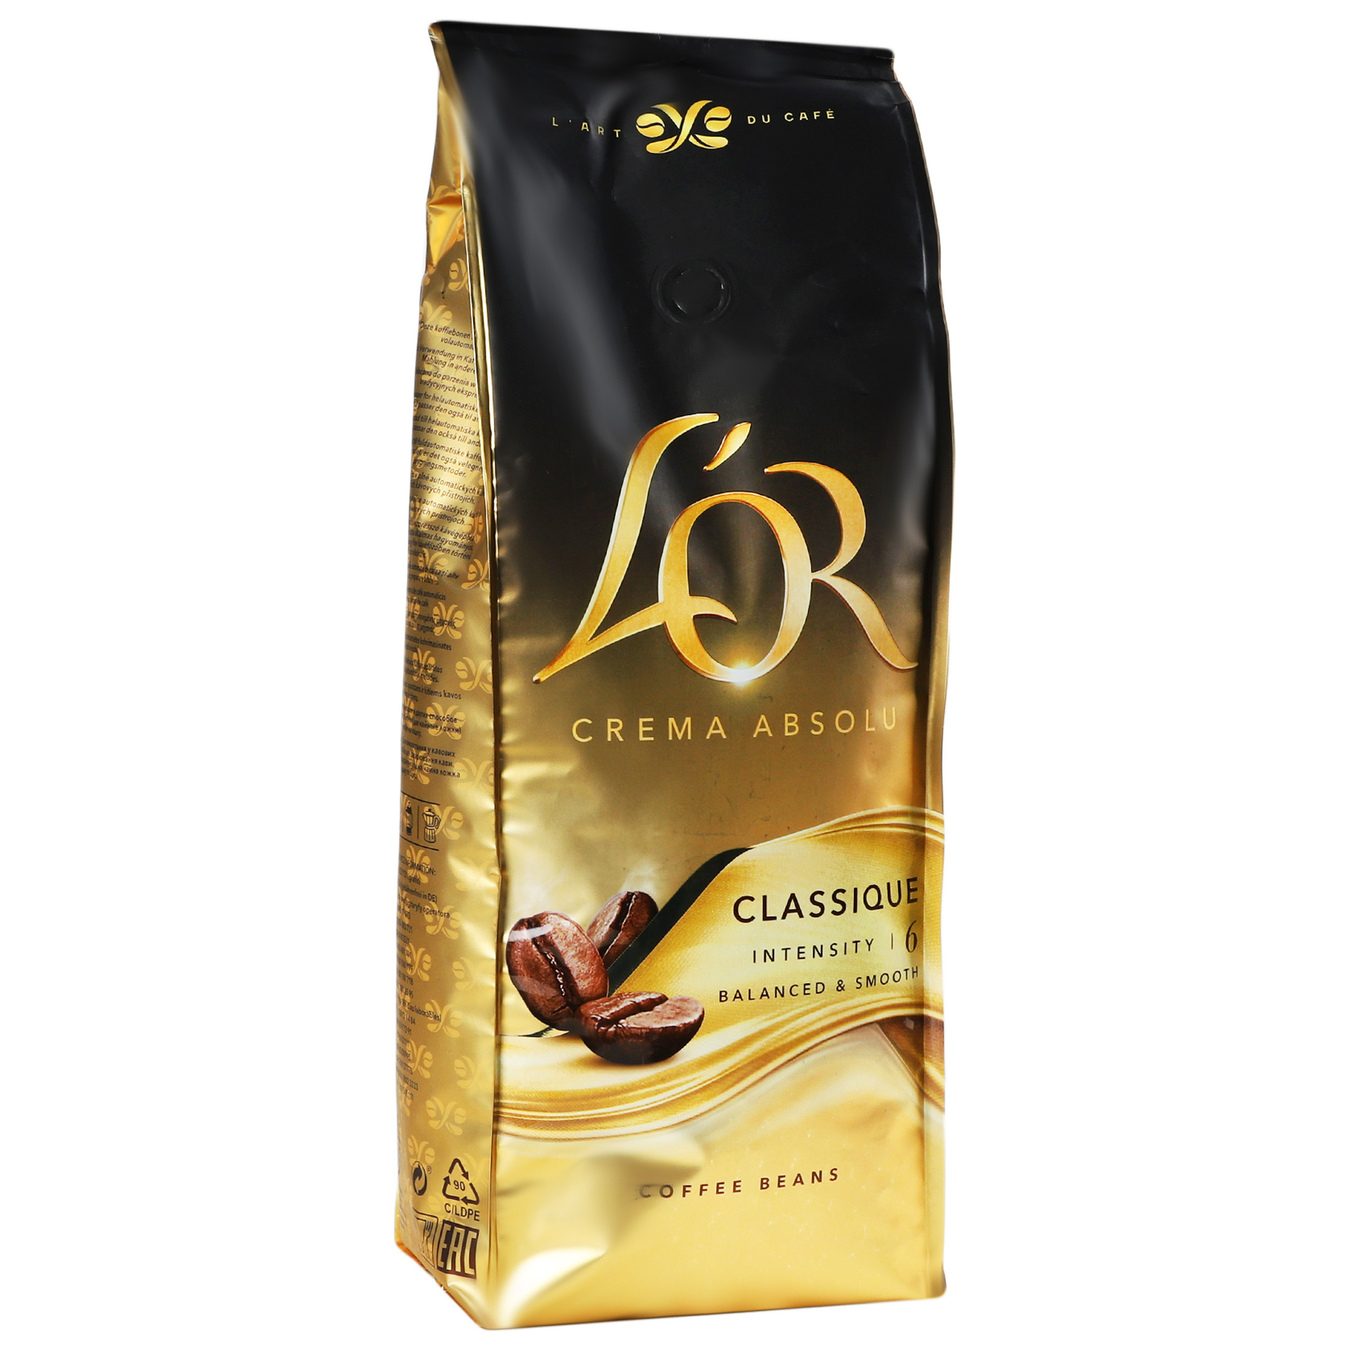 L'OR Crema Natural coffee roasted in beans Absolu Classique 1000g 3